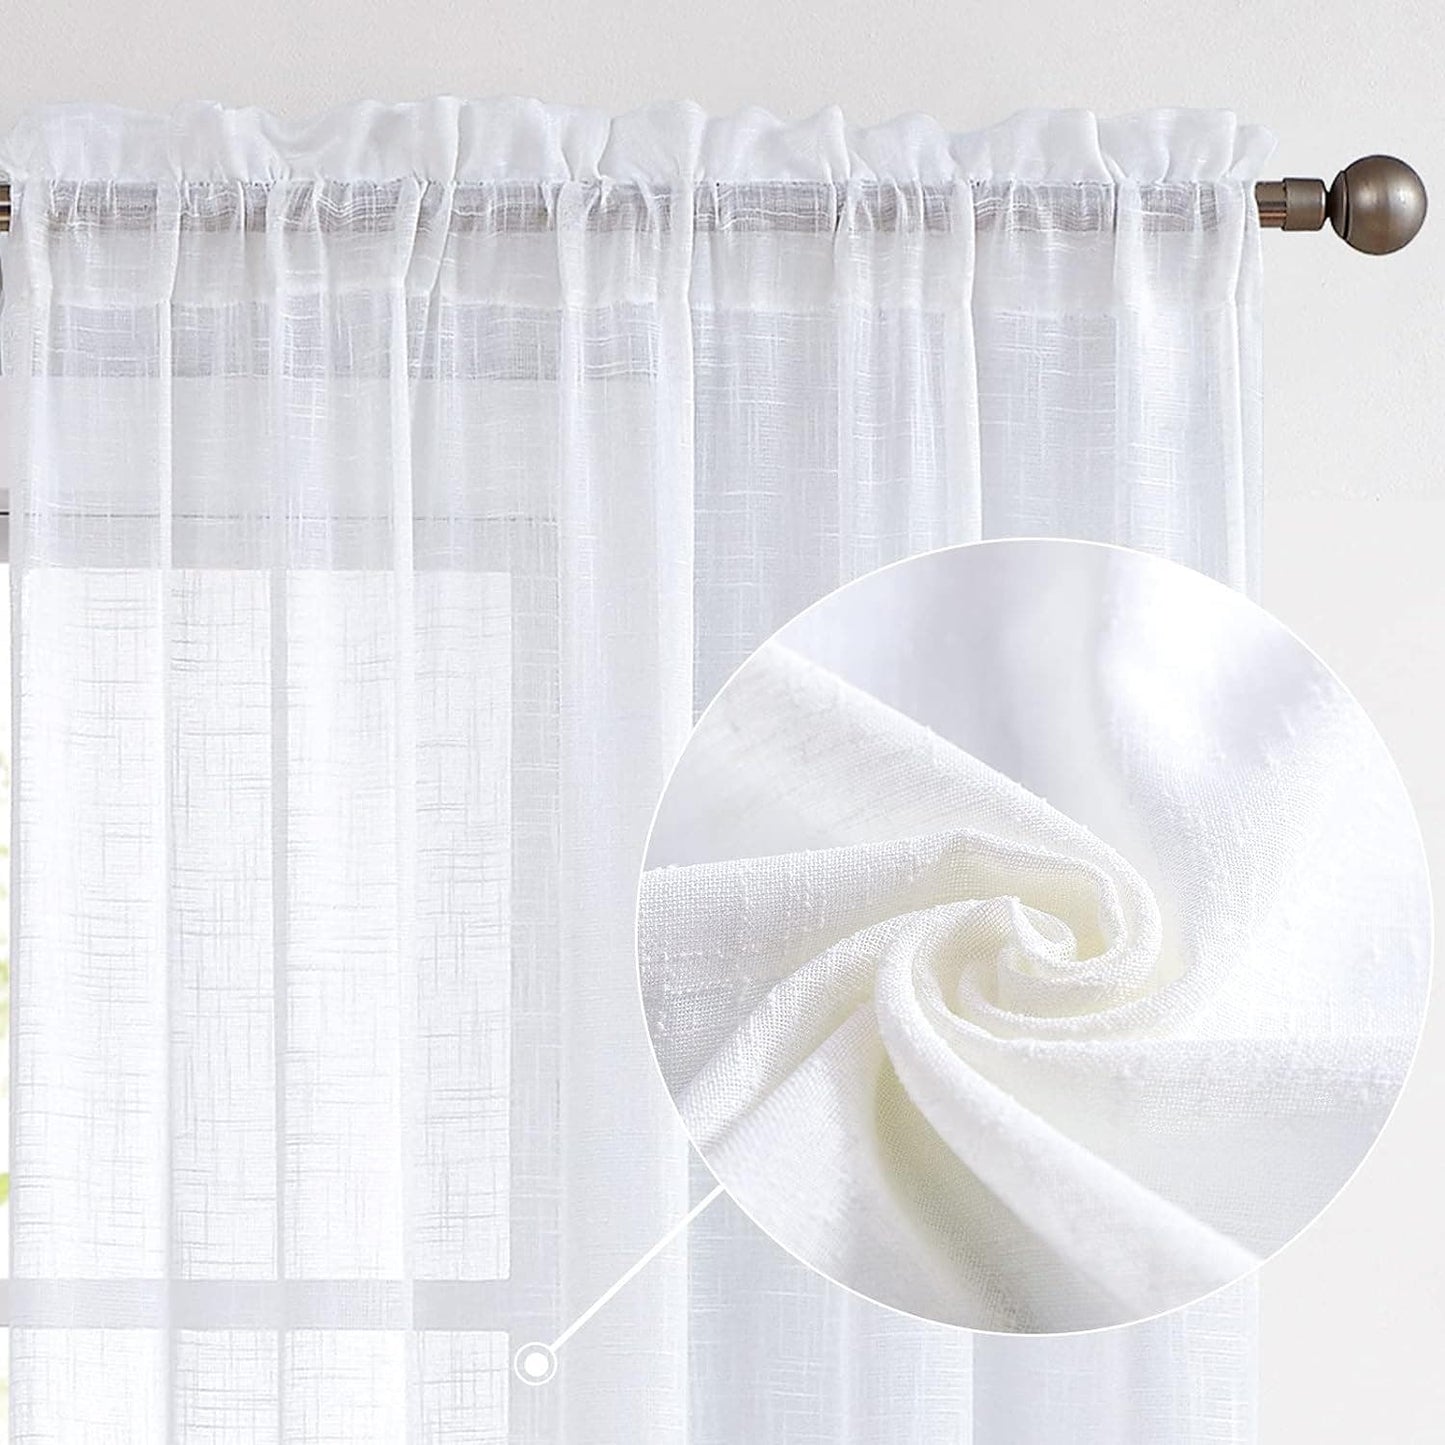 White Weave Sheer Curtains, 2 Panels @ 52"W x 108"L, Rod Pocket or Back Tab